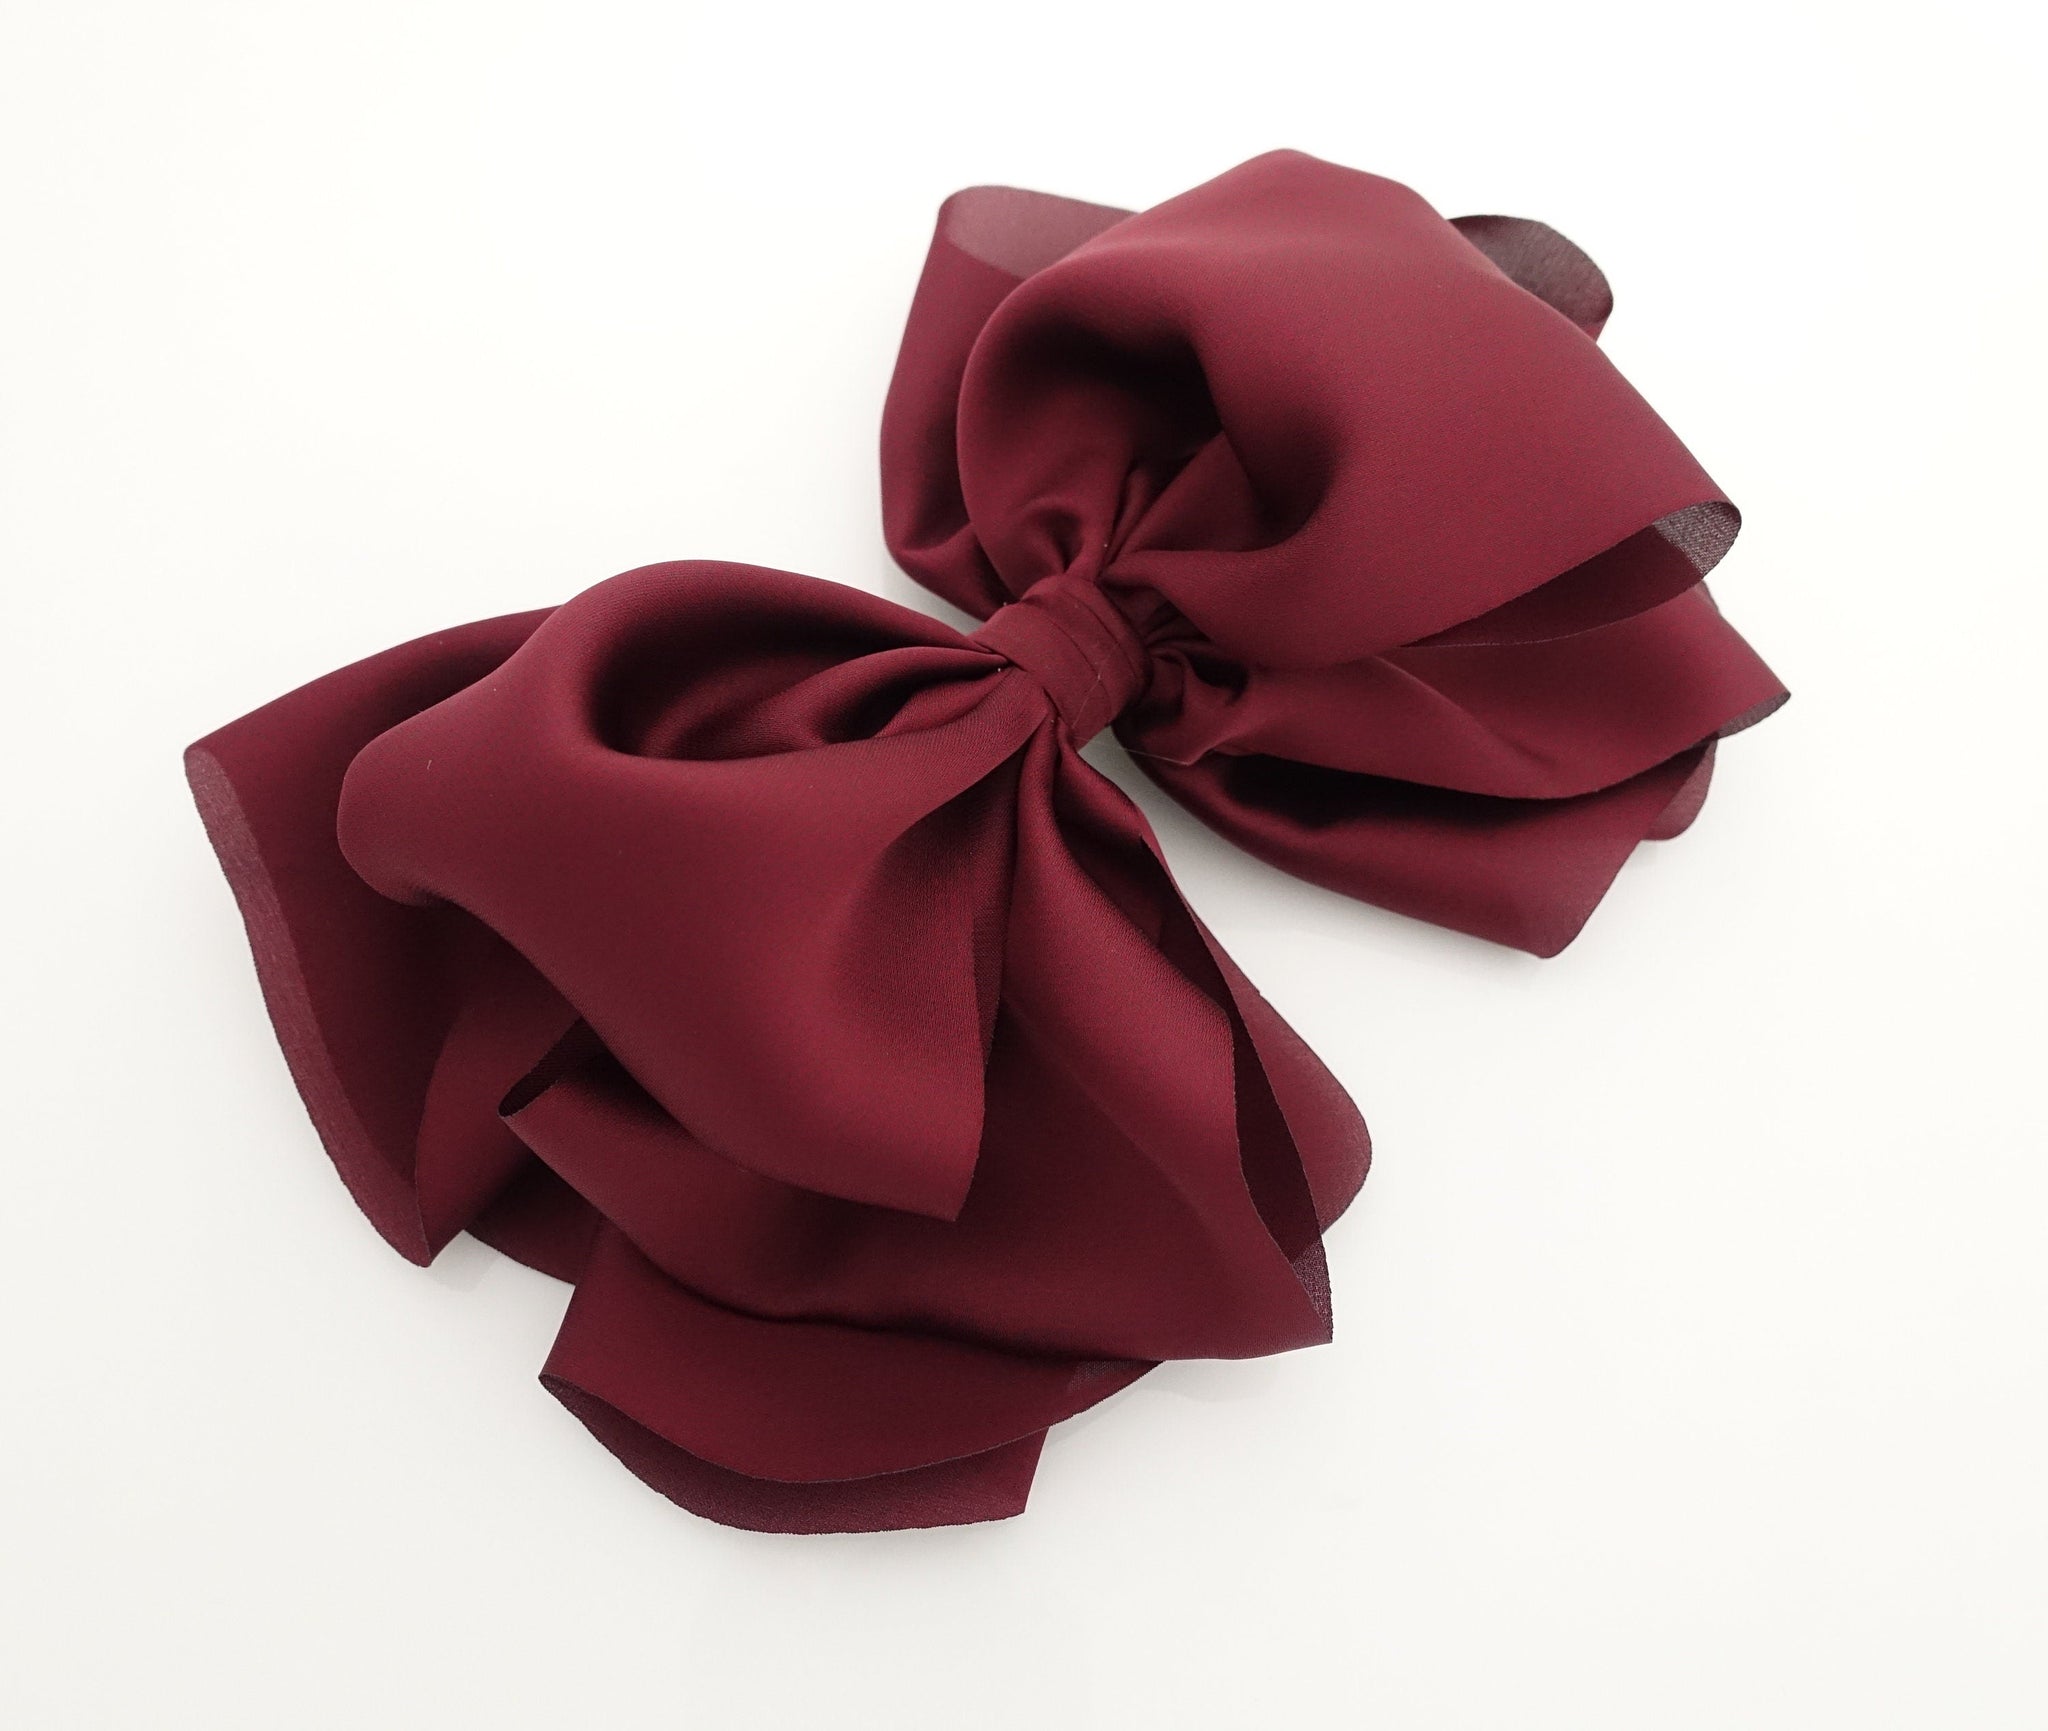 veryshine.com Barrette (Bow) Burgundy glossy satin  butterfly hair bow barrette volume up layered women hair bow barrette hair accessory